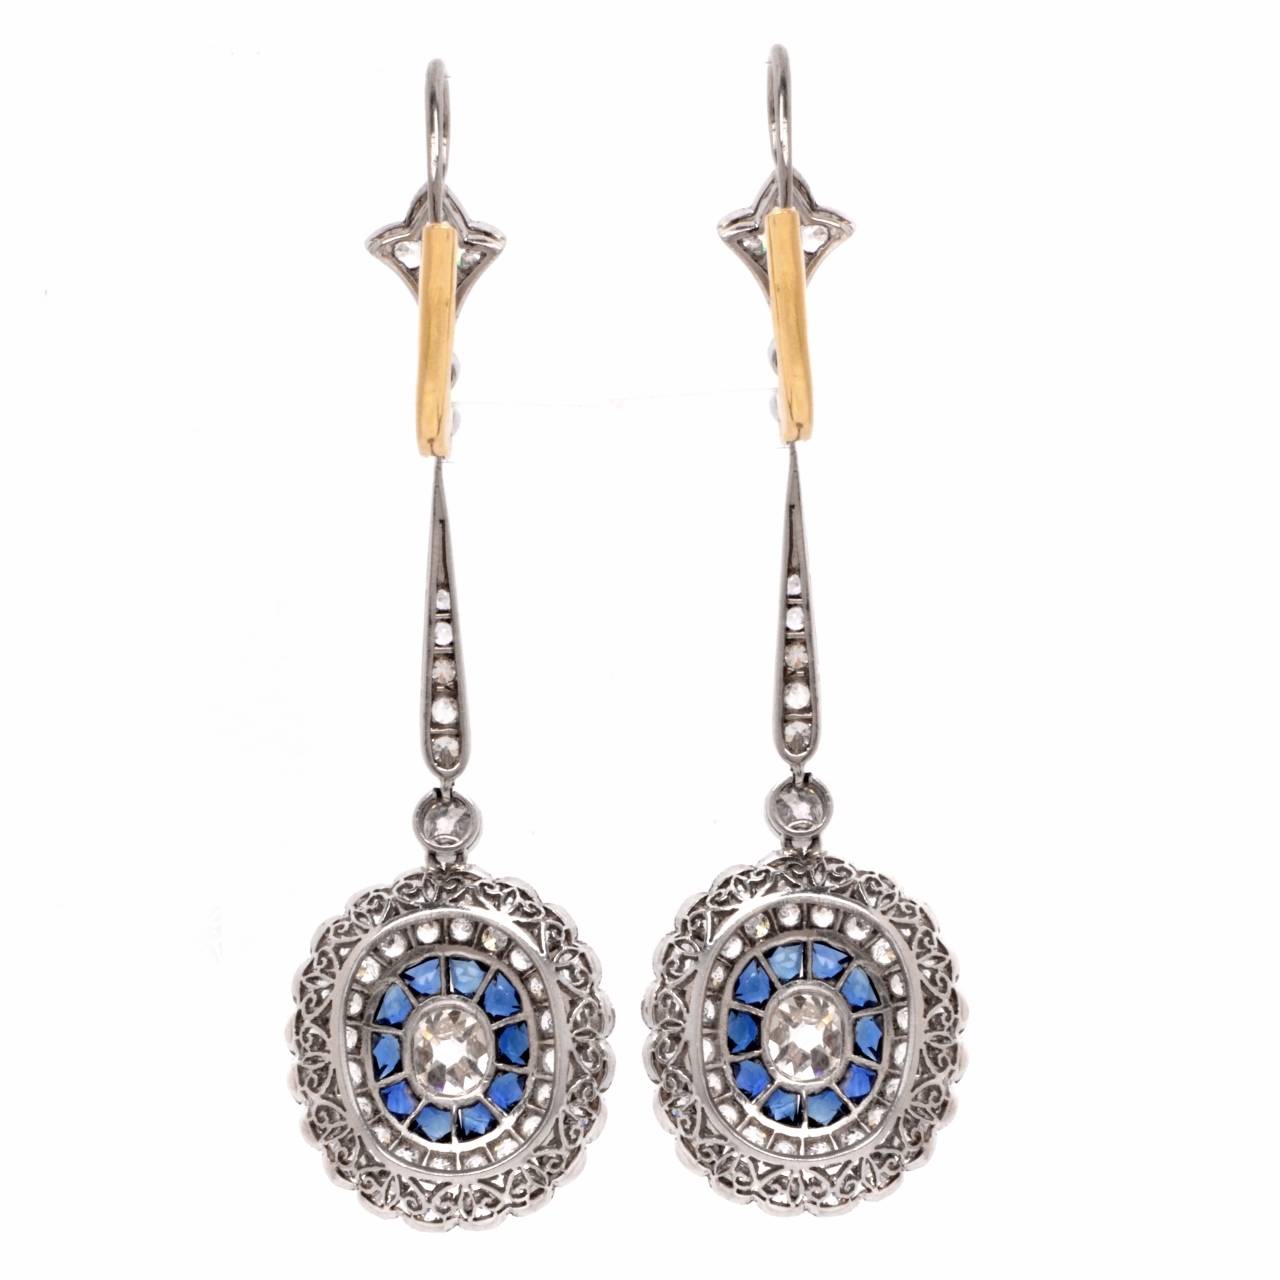 These exquisite diamond  and sapphire pendant  earrings are crafted in solid platinum, weighing app. 7.7 grams. These earrings expose a pair of  genuine cushion- cut diamonds, cumulatively weighing  app.0.70 cts, graded  H-I  color,  VS  clarity.